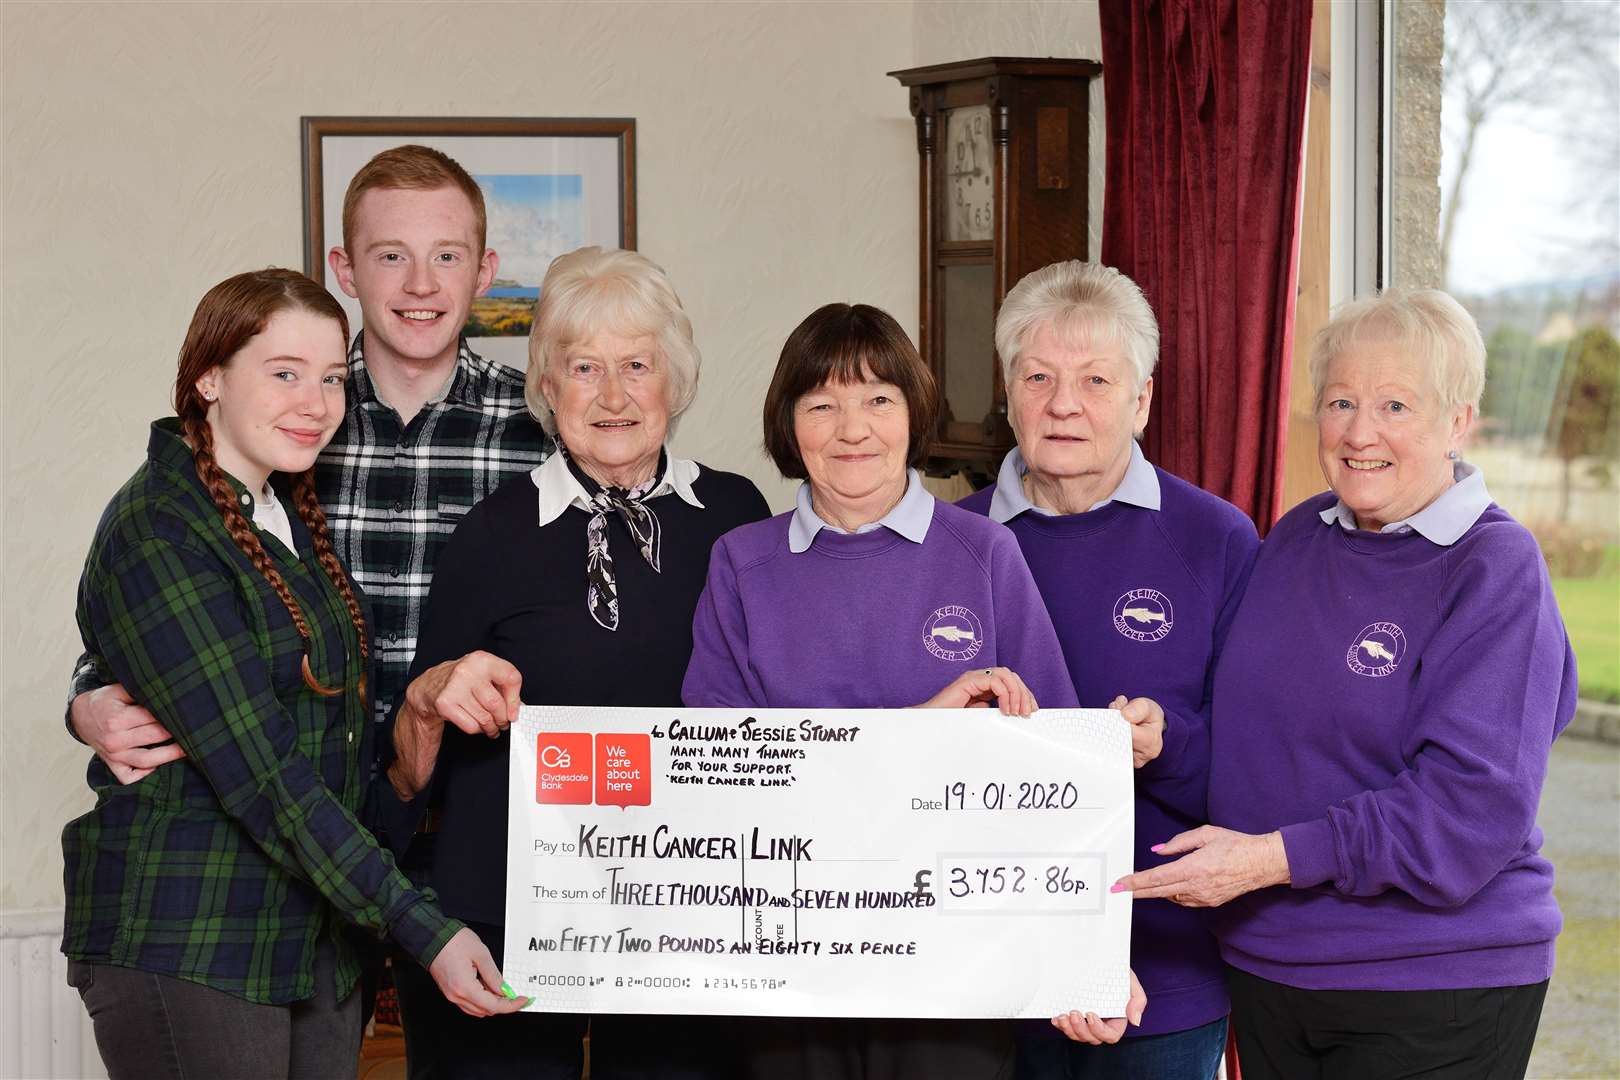 Keith man Callum Stuart and (from left) girlfriend Kayleigh Dalgarno and granny Jessie Stuart present a cheque for £3752 to Keith Cancer Link's Isobel Sadowski, Irene Martin and Adeline Reid. Picture: John MacLeod/Moraylight.